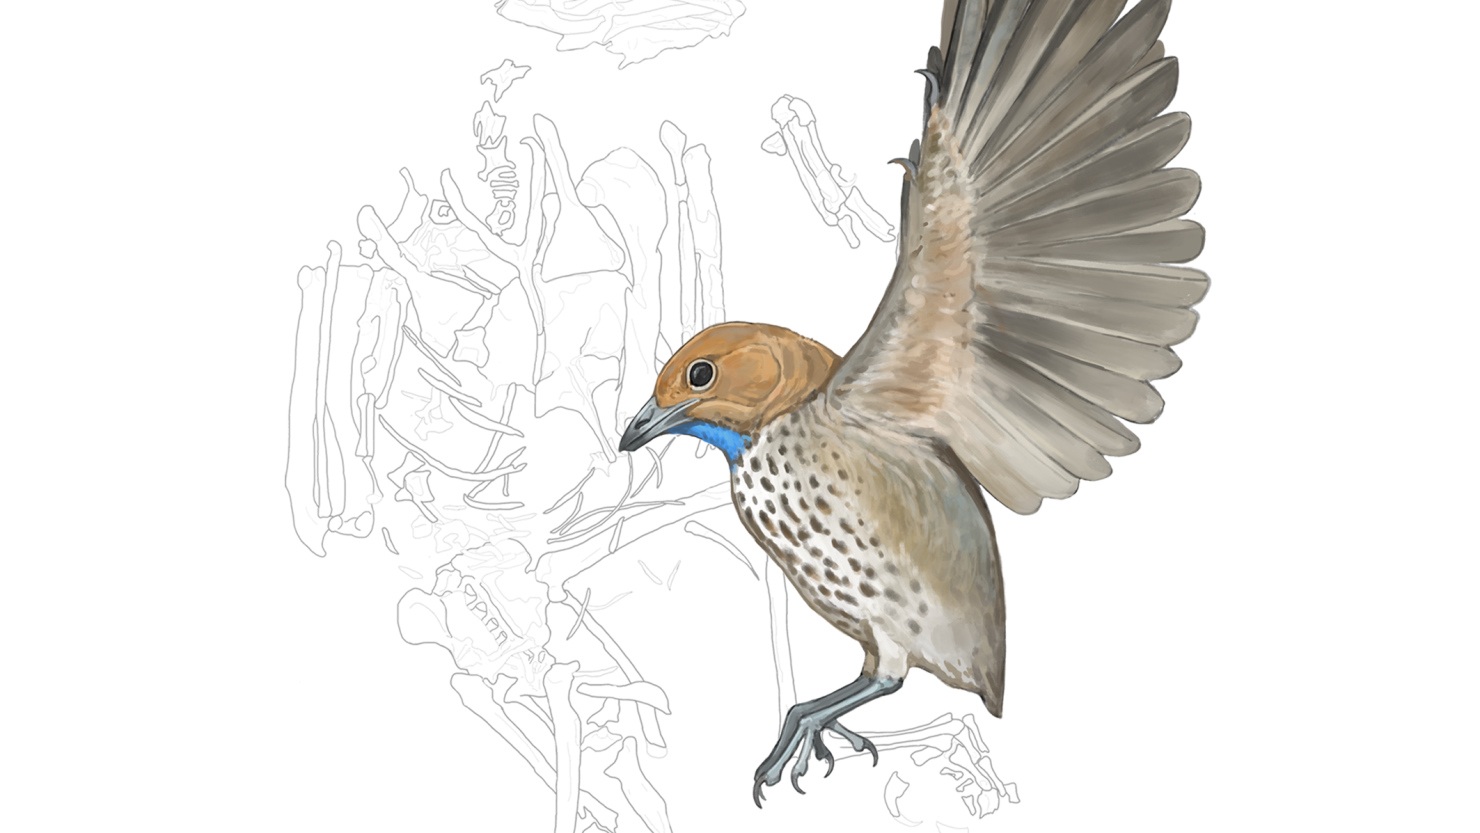 An illustration of the species Attenborough’s strange bird is depicted next to an outline of its fossil.